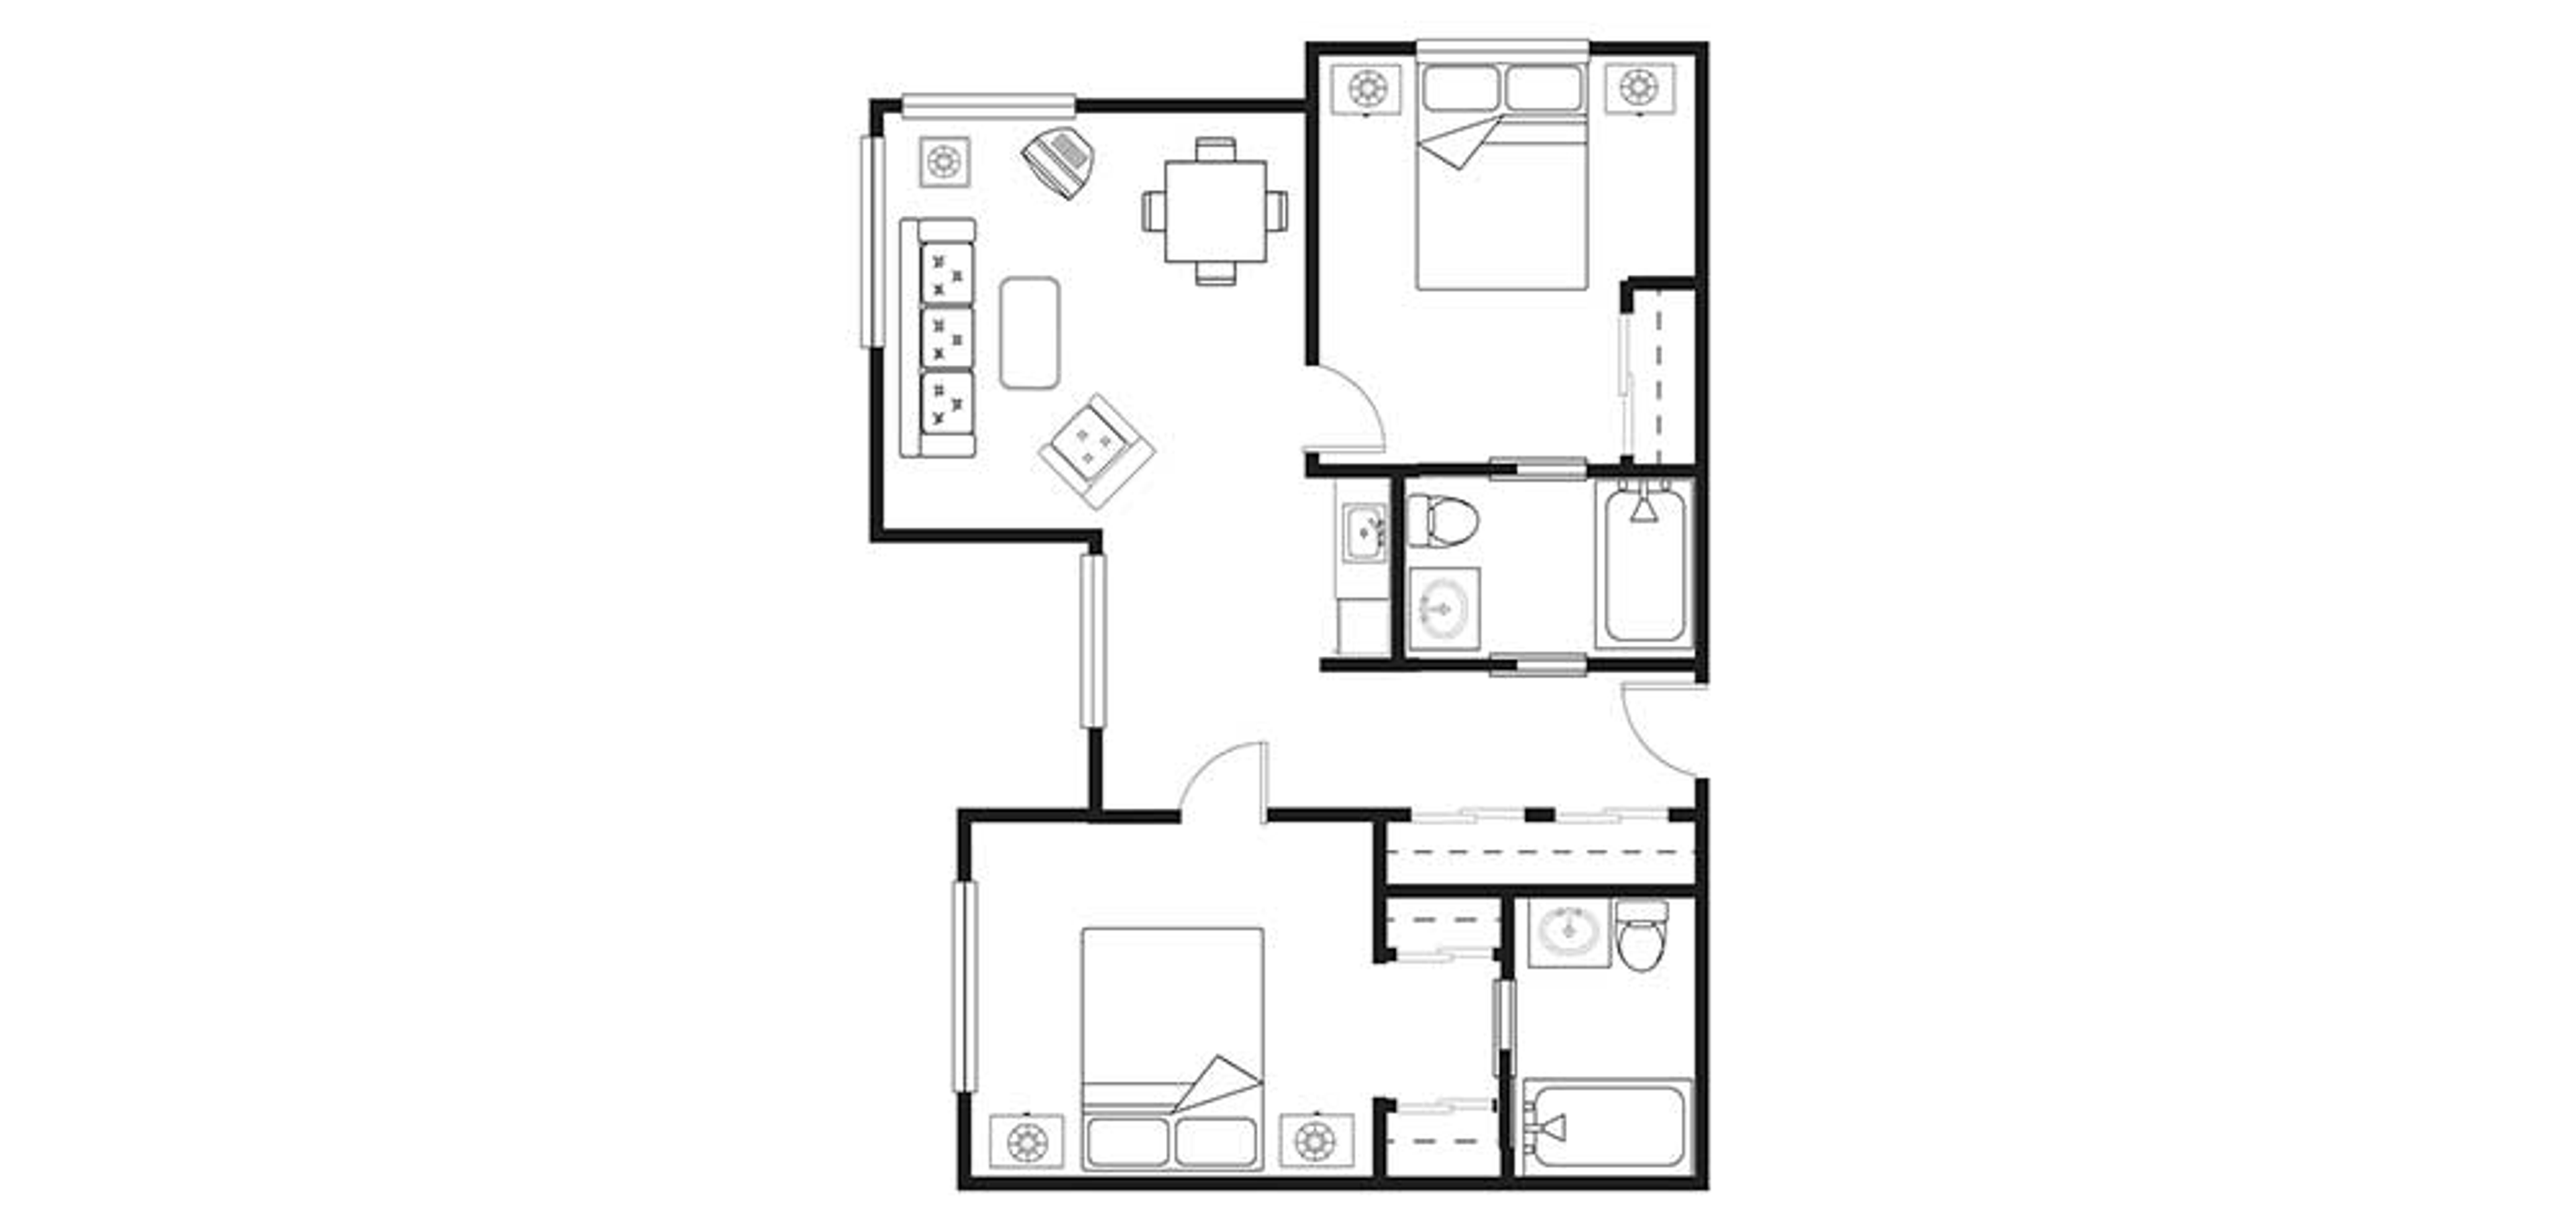 Floorplan - Redwood Heights - Two Bedroom 934 sq. ft. Assisted Living